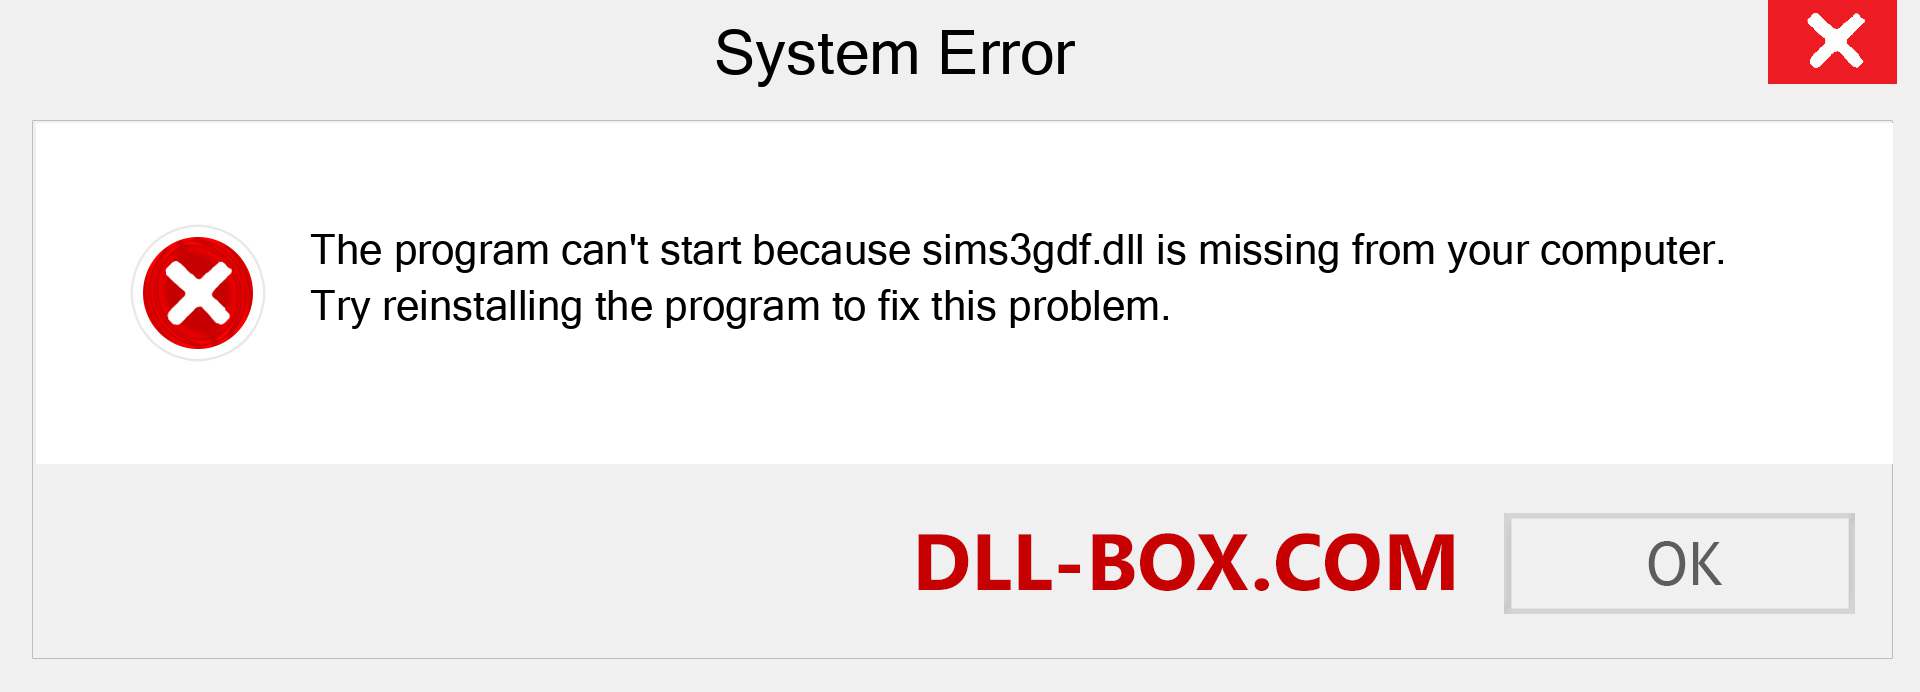  sims3gdf.dll file is missing?. Download for Windows 7, 8, 10 - Fix  sims3gdf dll Missing Error on Windows, photos, images